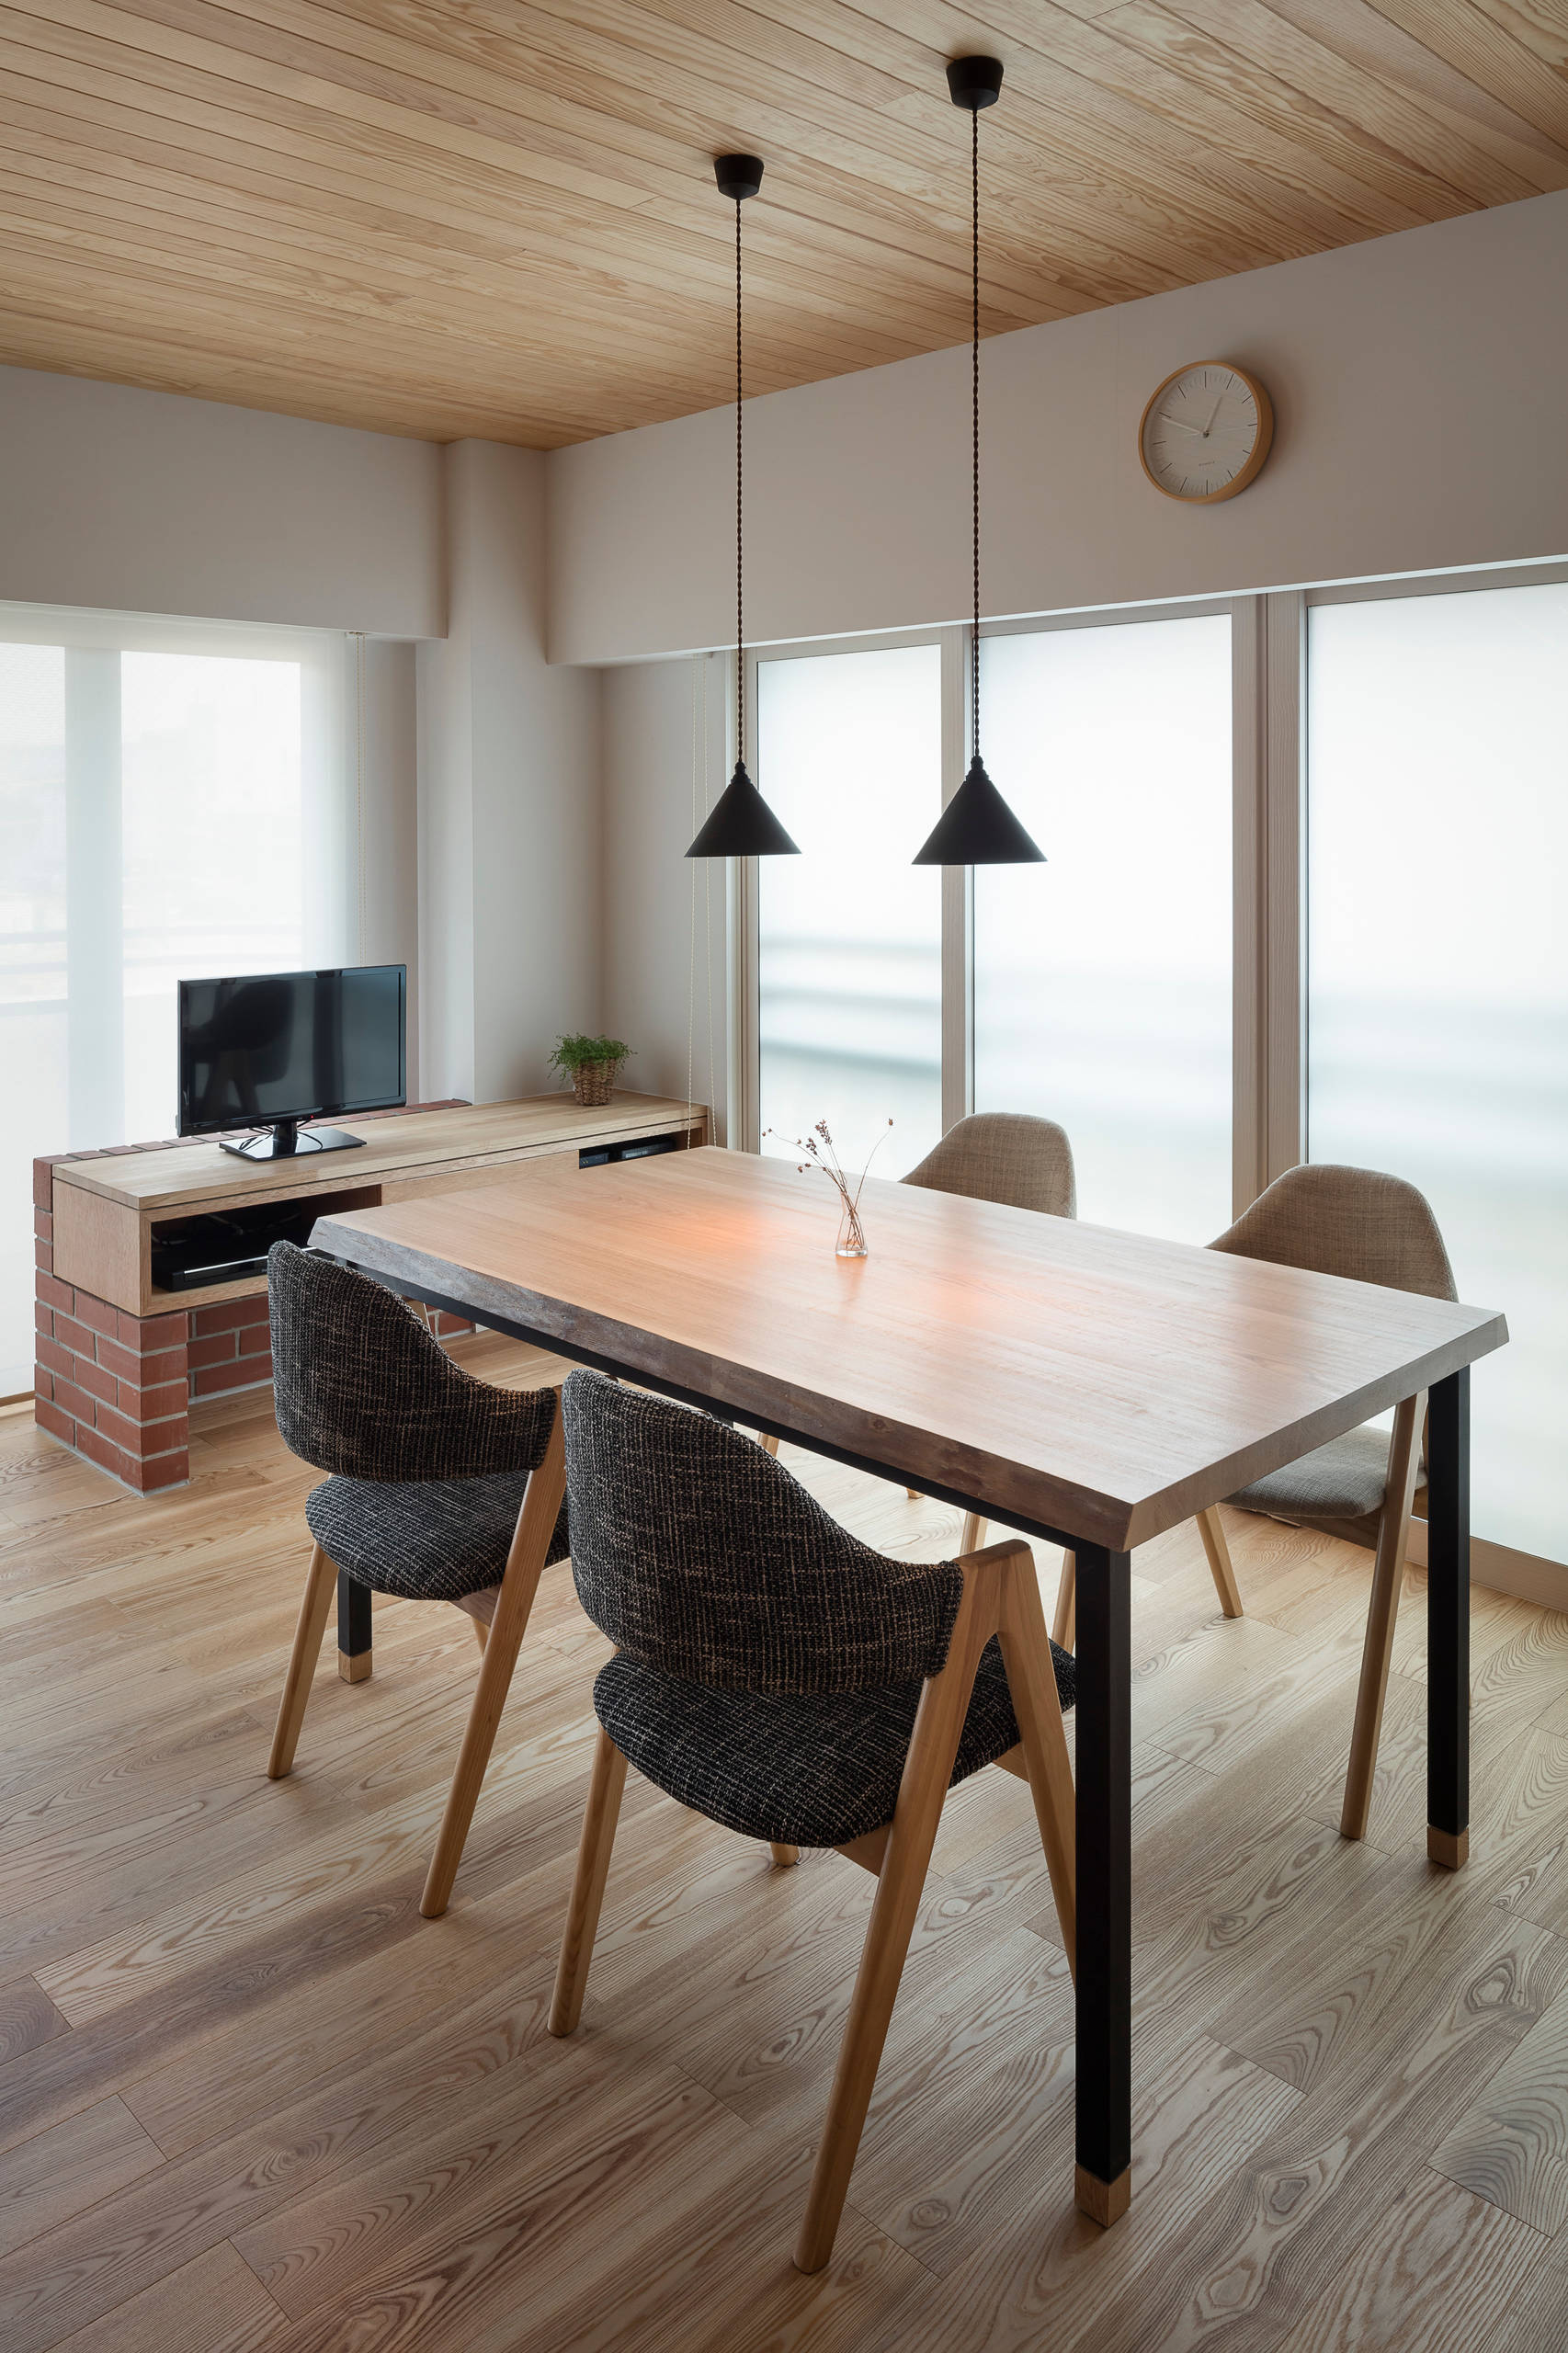 Ensemble レンガの家具で間仕切るマンションリノベーション Contemporary Dining Room Other By 内海聡建築設計事務所 Houzz